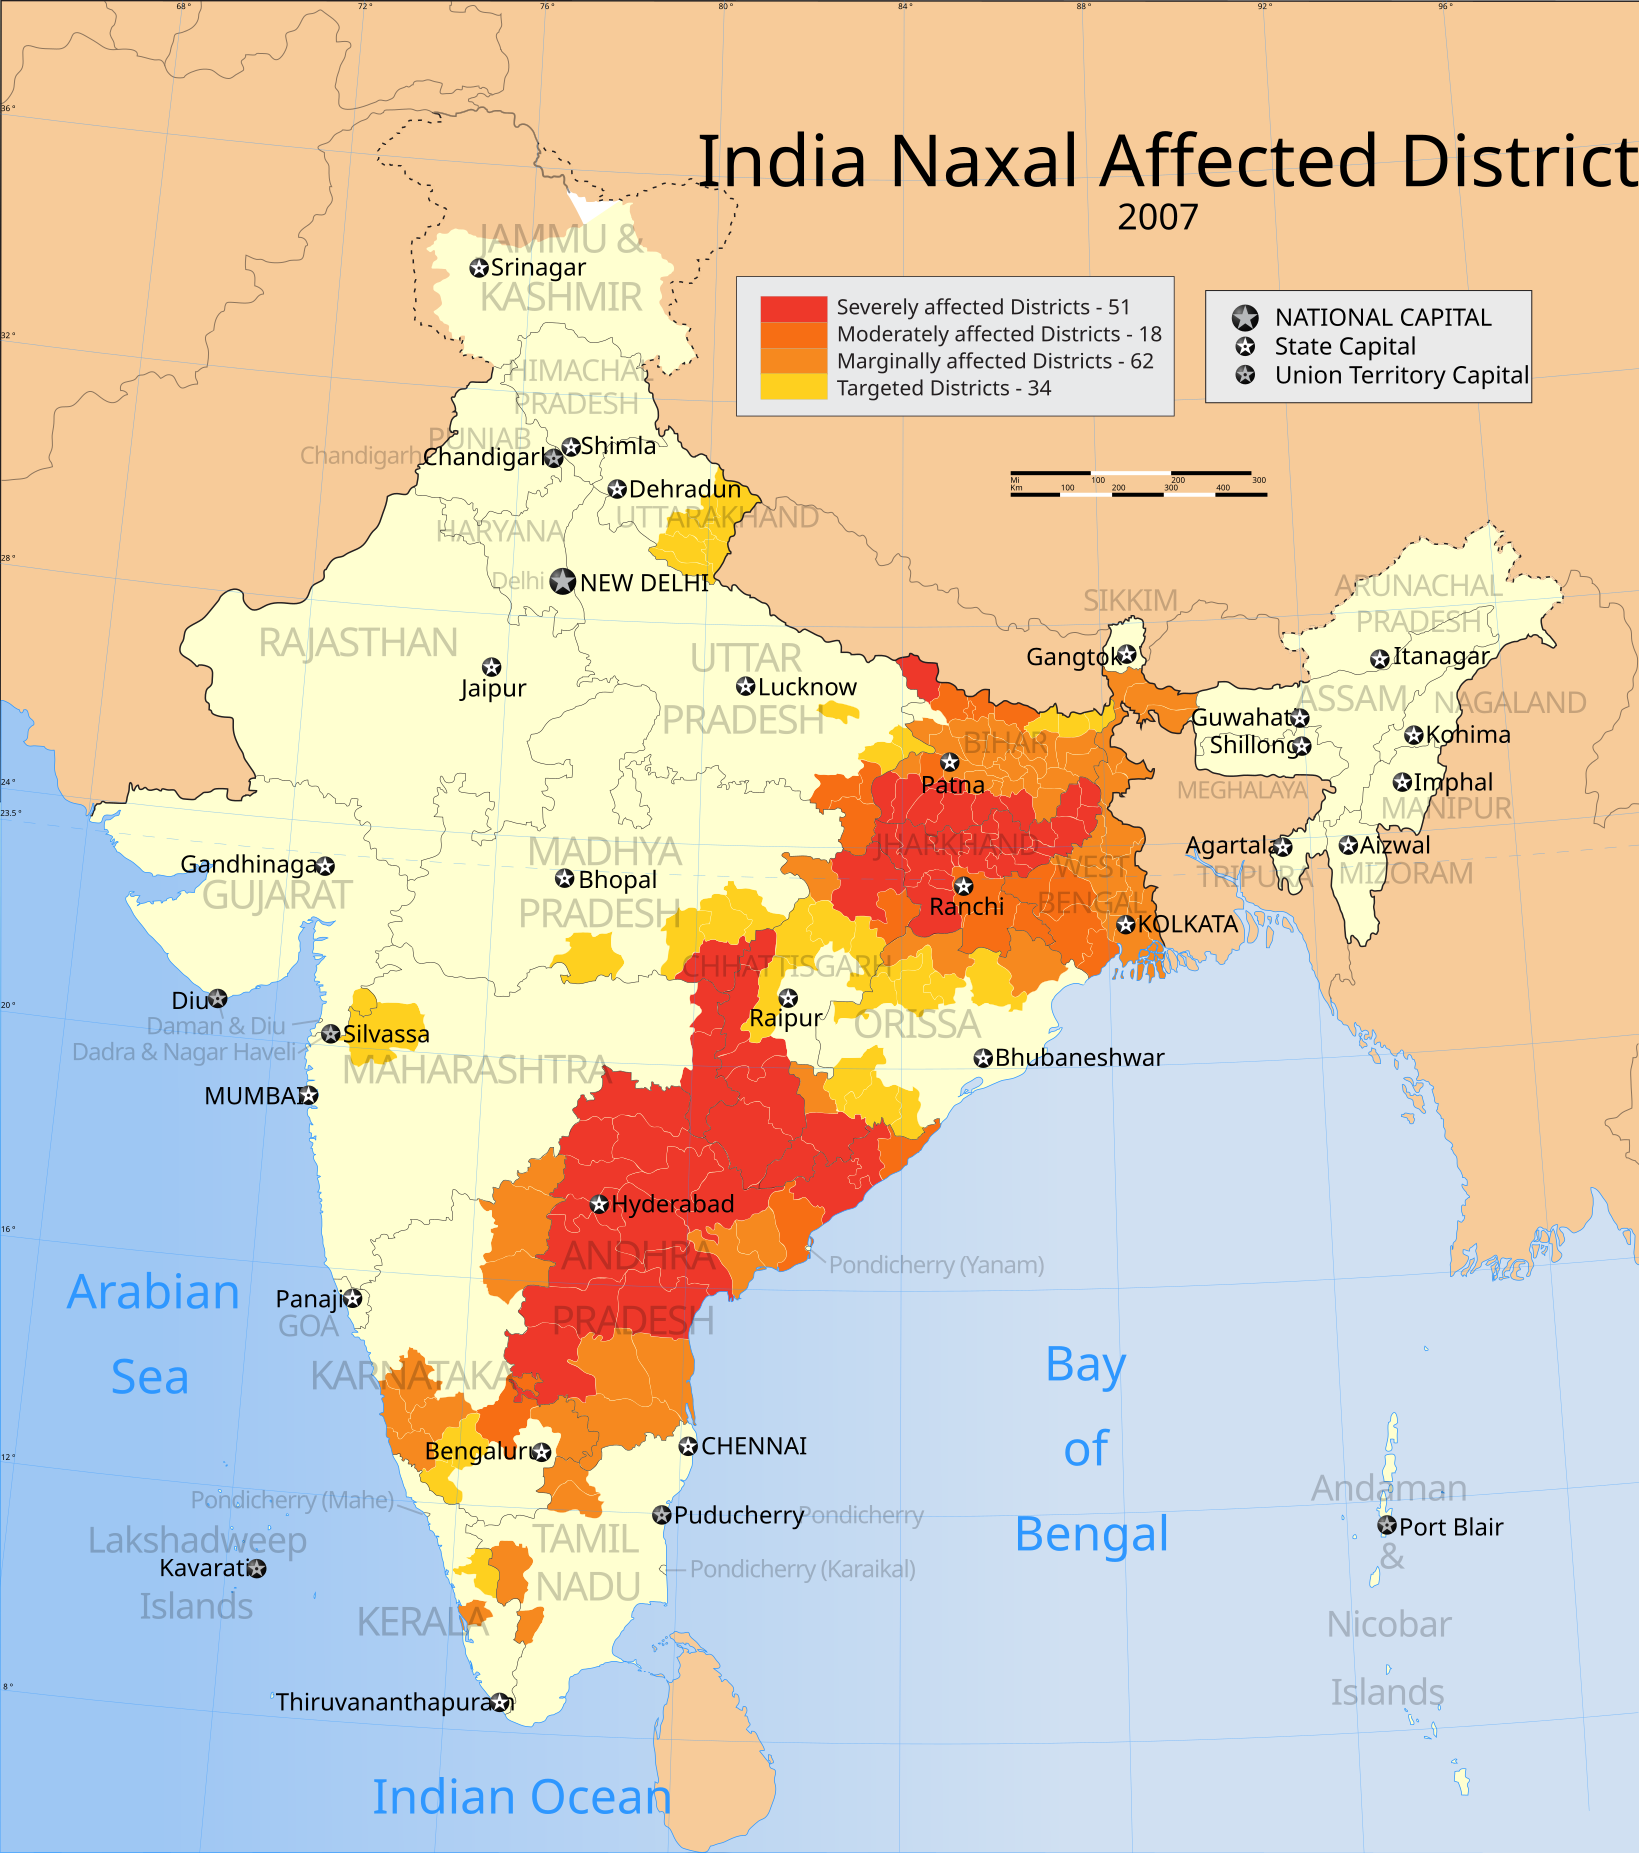 1639px-India_Naxal_affected_districts_map.svg.png